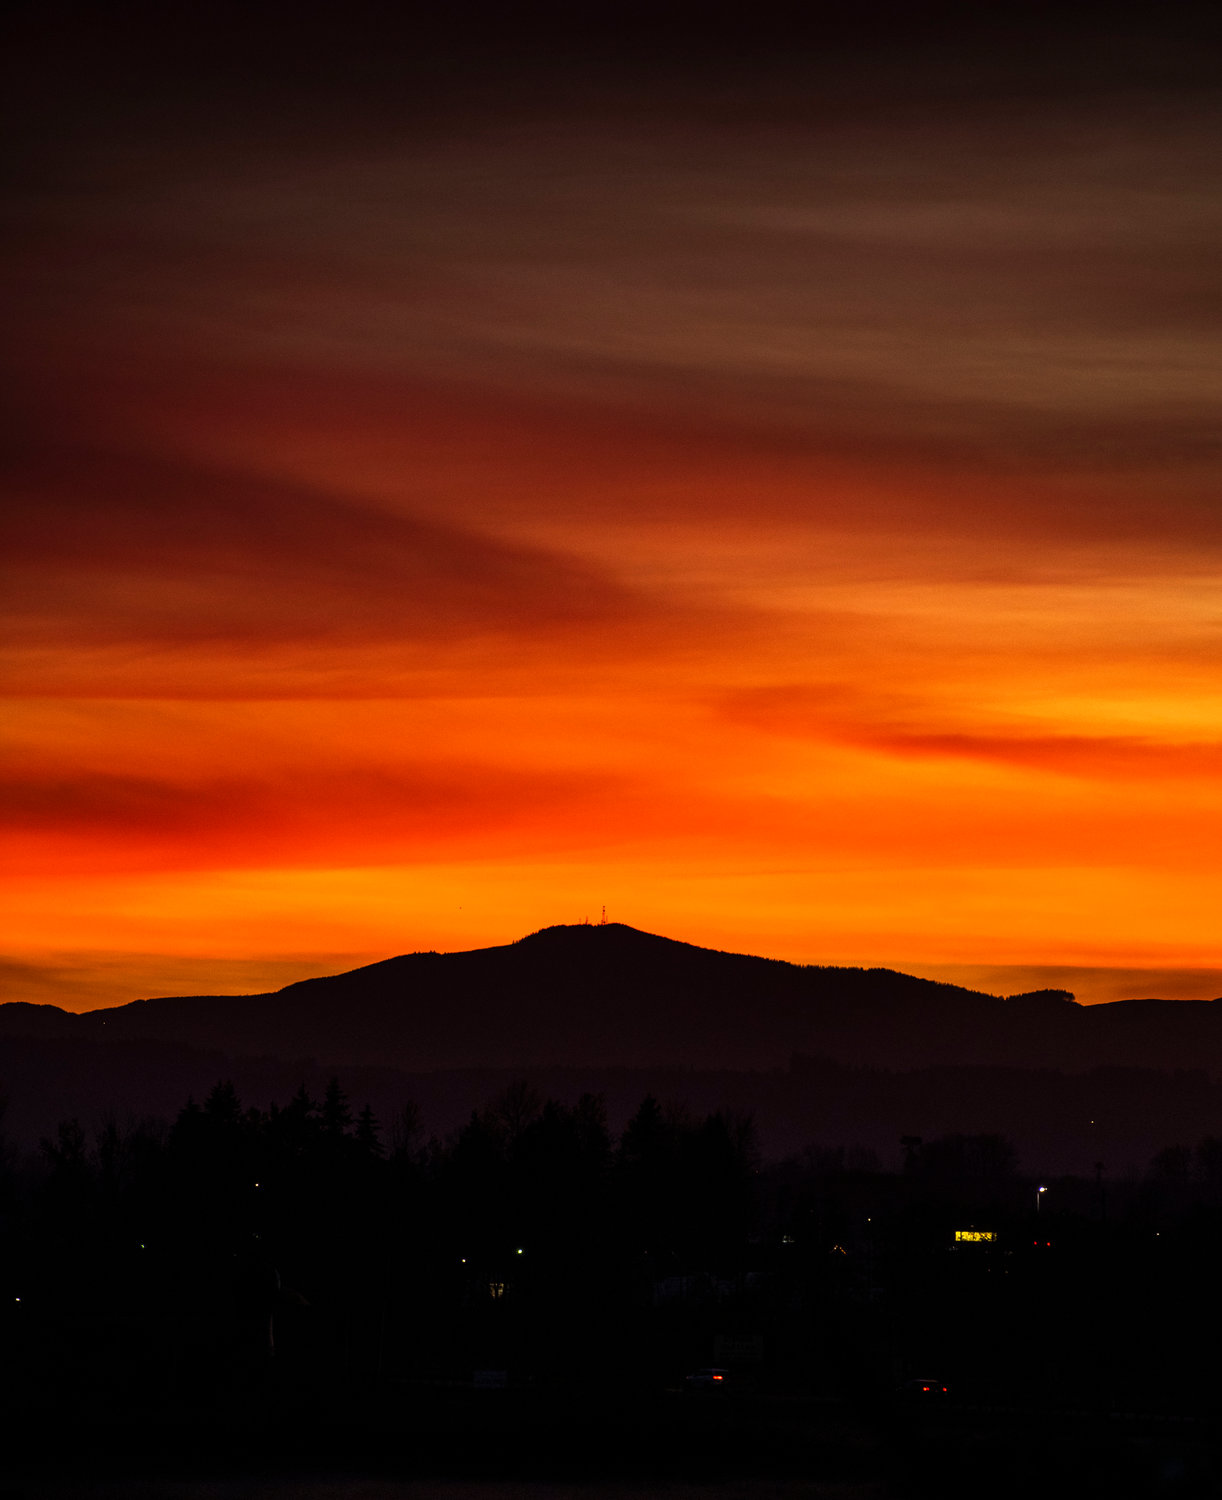 The sun sets over Baw Faw Peak and the Willapa Hills as seen from Chehalis Wednesday evening.